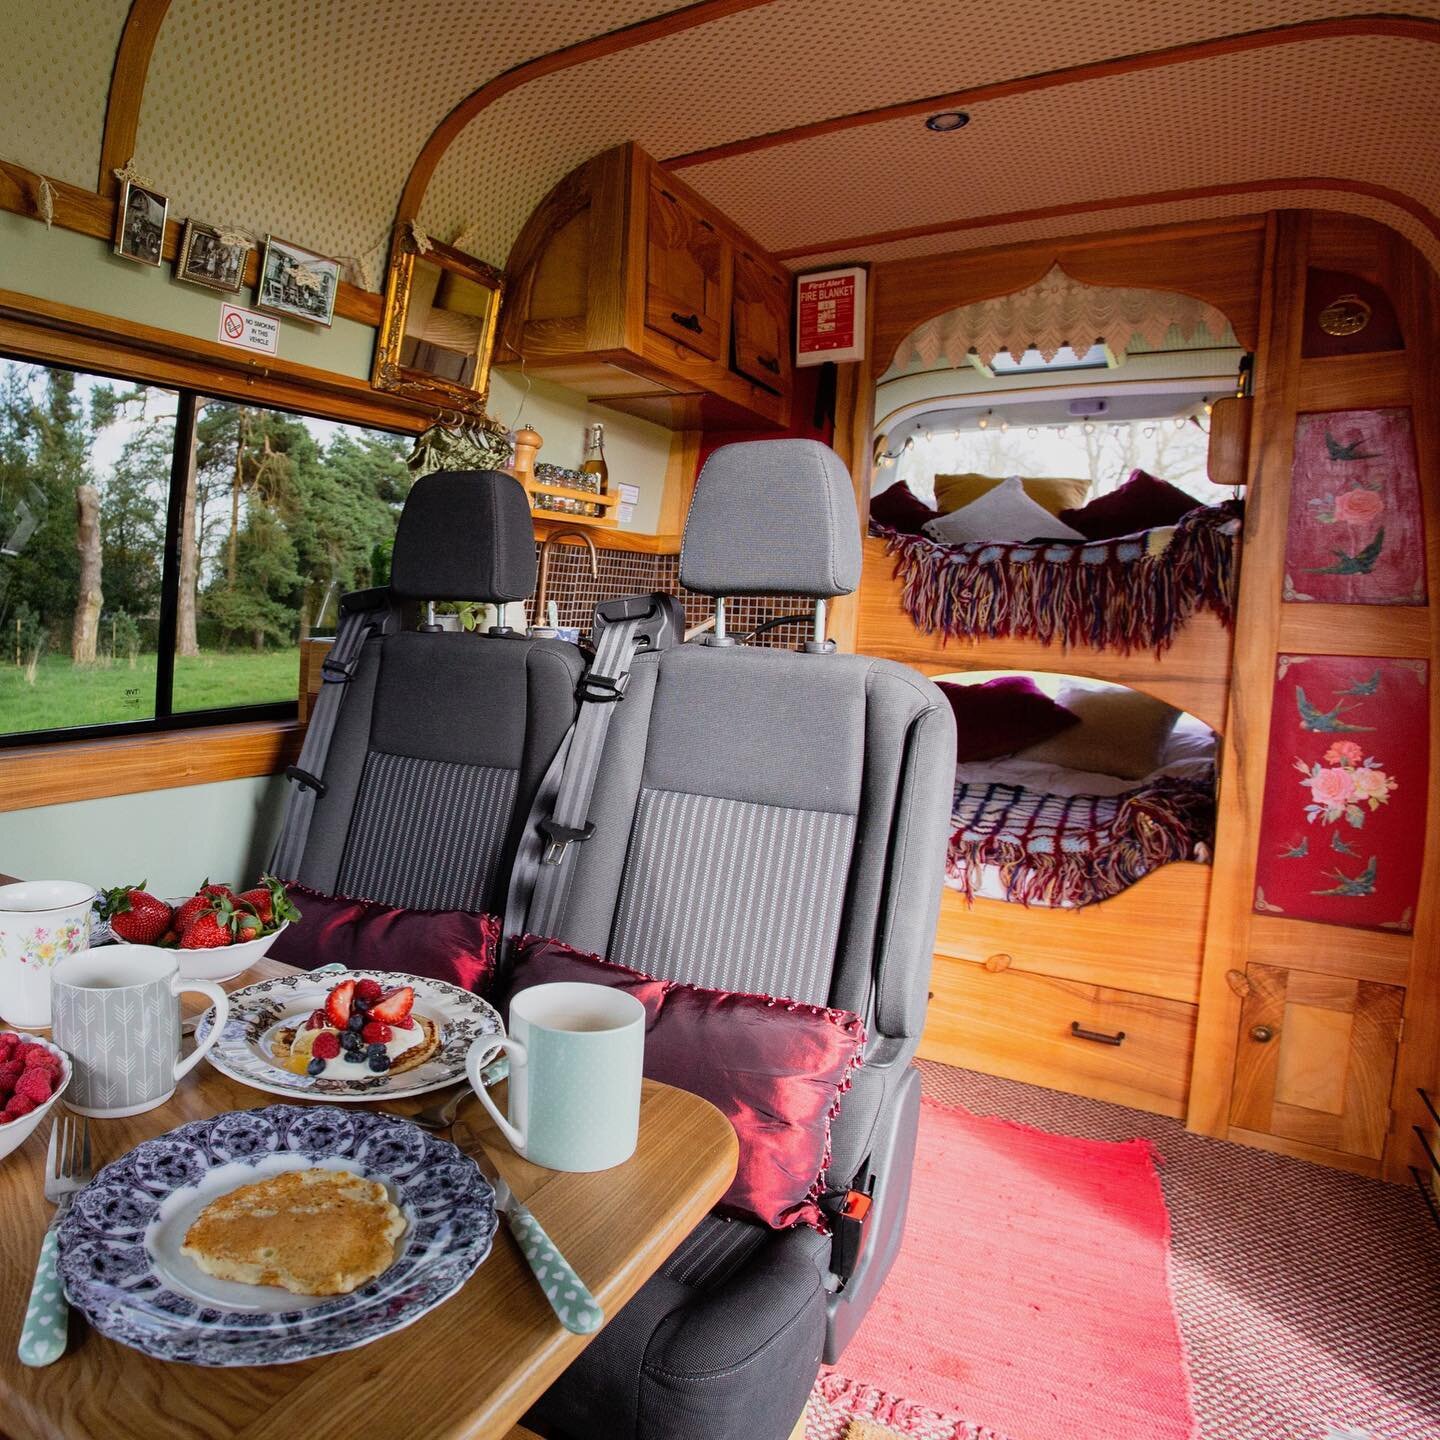 Roma was the first Campervan I converted. Off grid with the luxury of two double beds, kitchen and dinning area. 
Who would of thought you could fit all this into a Mercedes van! 🚐 

#romacampervan #campervanhireoxfordshire #hire #roma #campervanhir